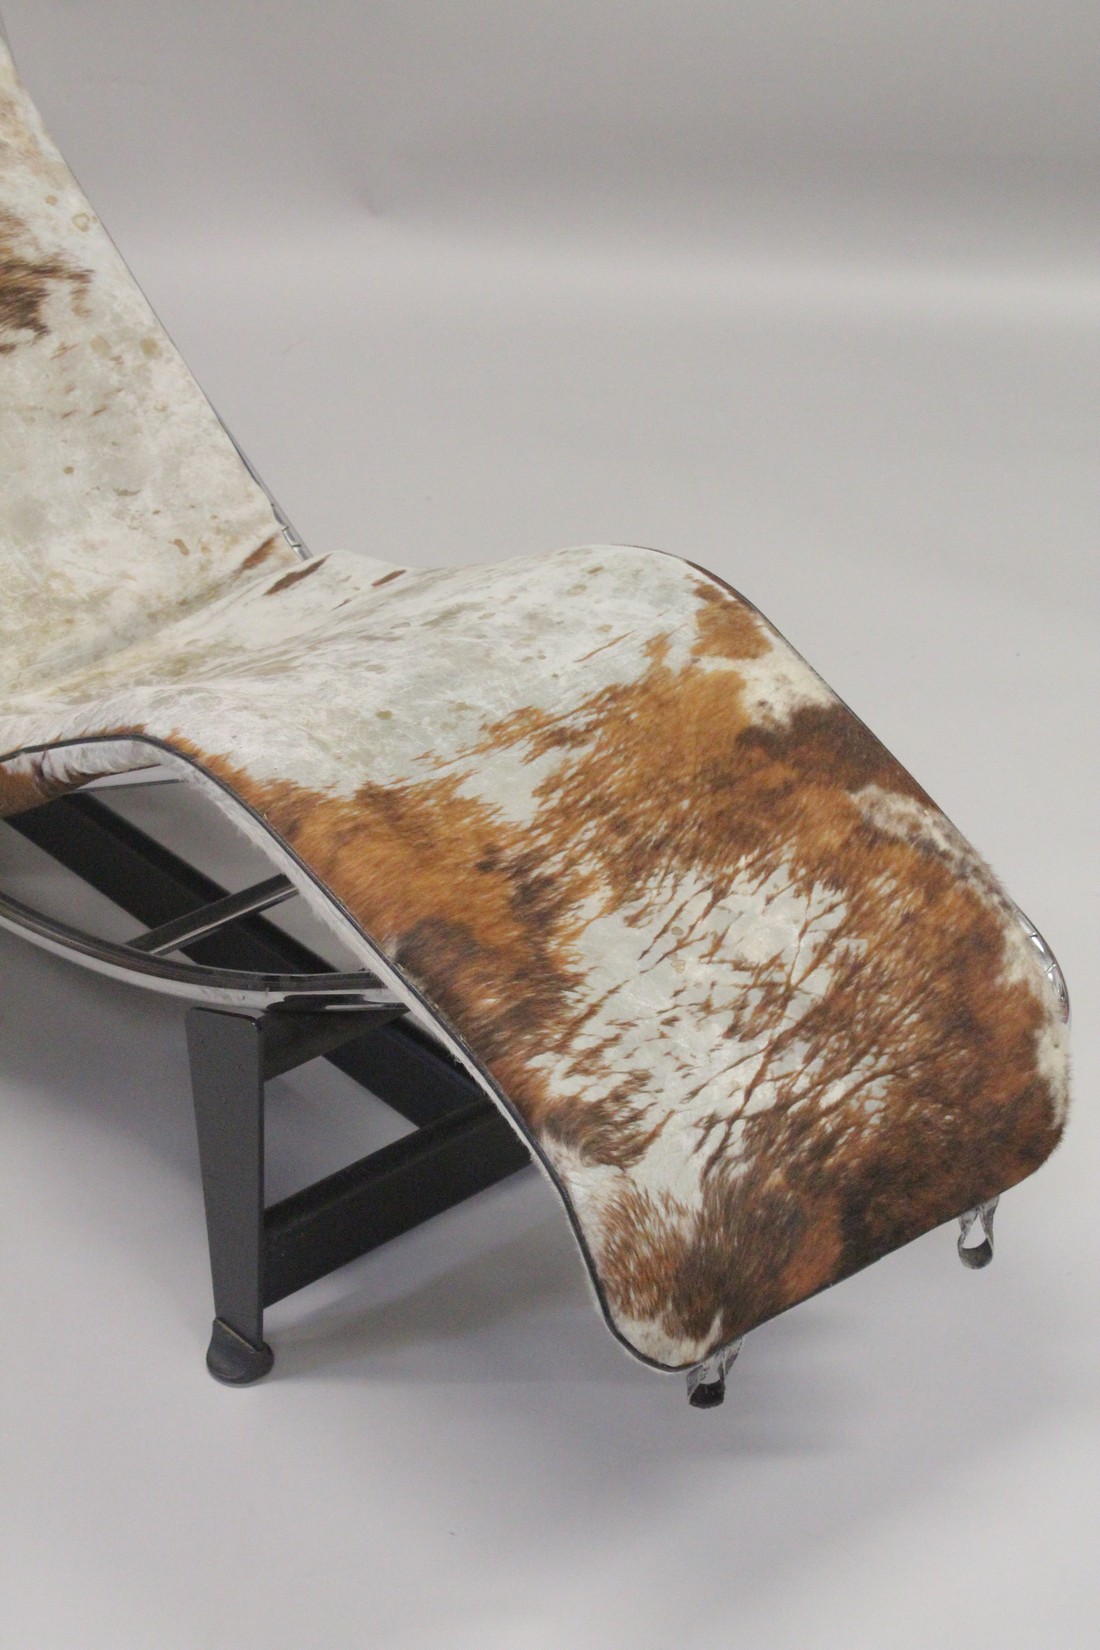 A CHARLOTTE PERRIAND, LE CORBUSIER STYLE CHAISE LONGUE, upholstered in cow hide. - Image 3 of 4